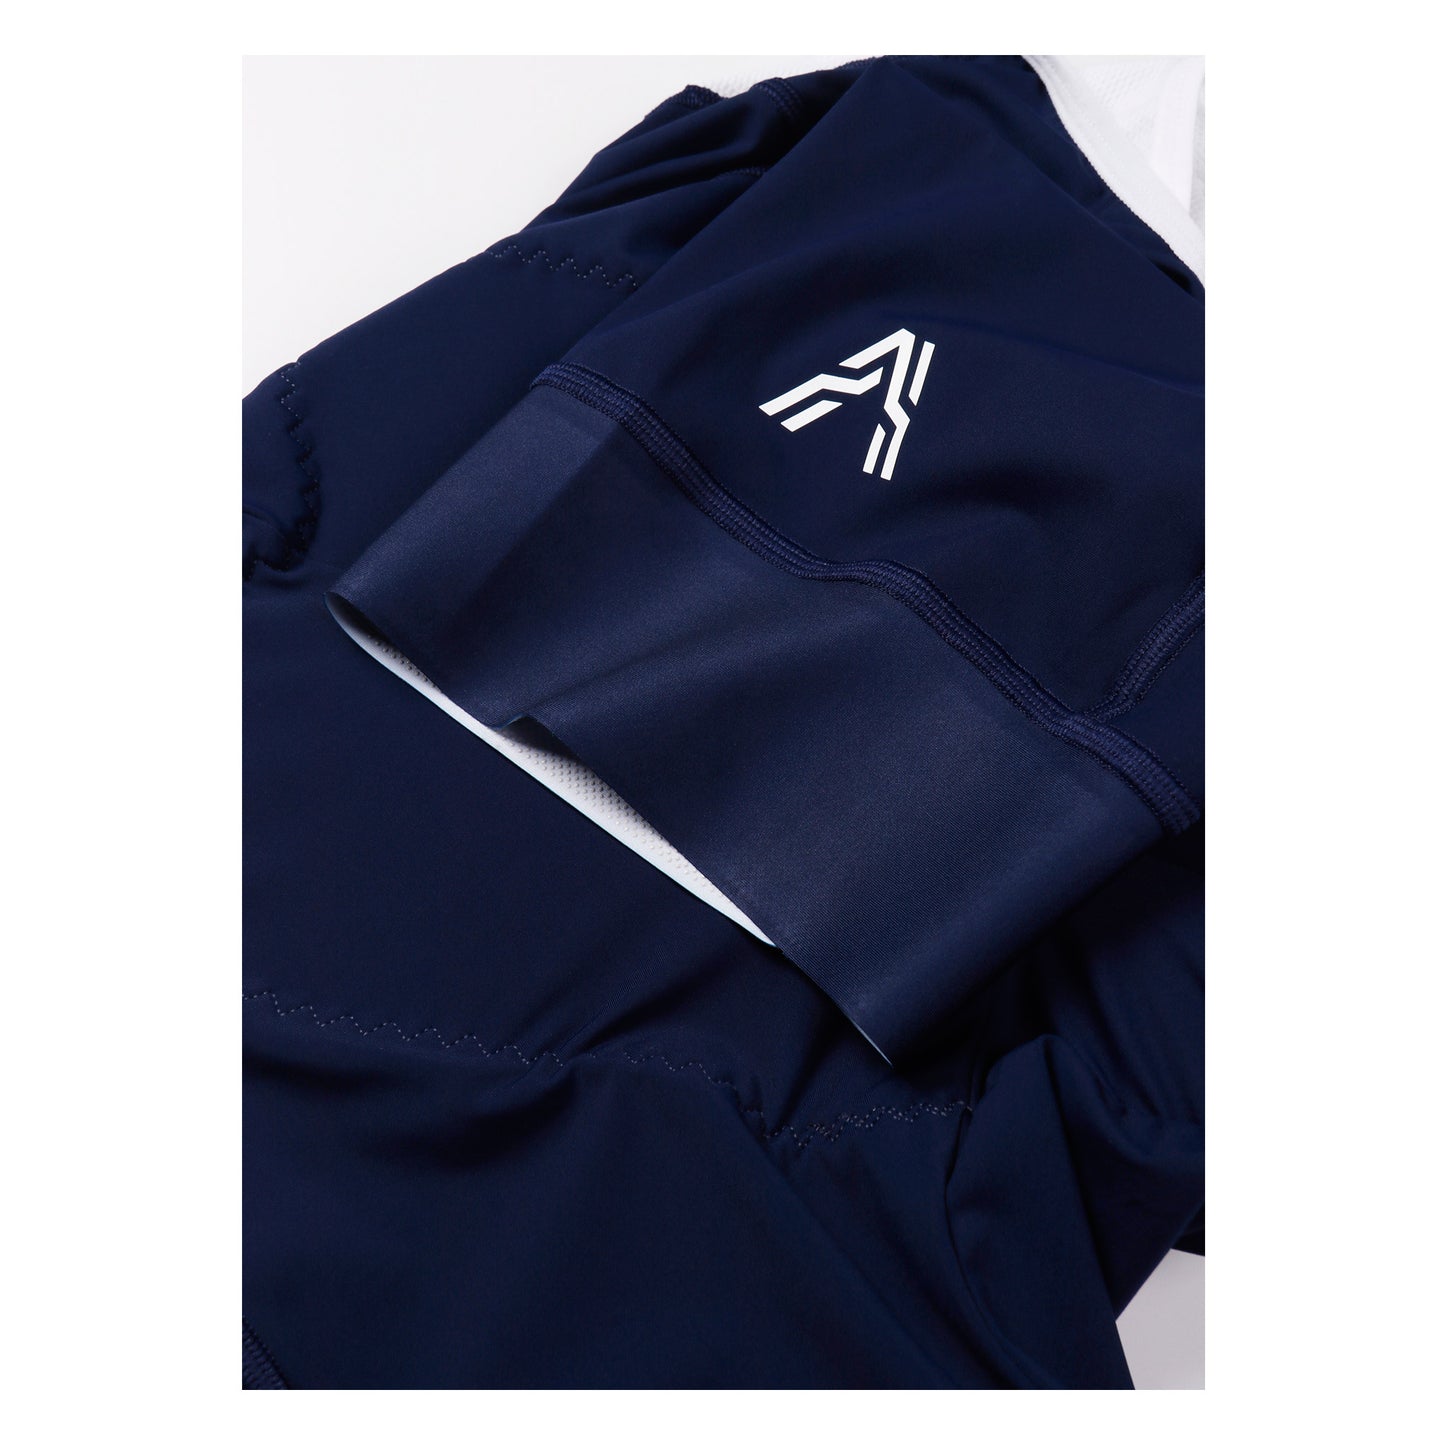 Legend Men Bib Short Navy by Ascender Cycling Club Zürich in Switzerland Silicon Injected Leg Grippers View